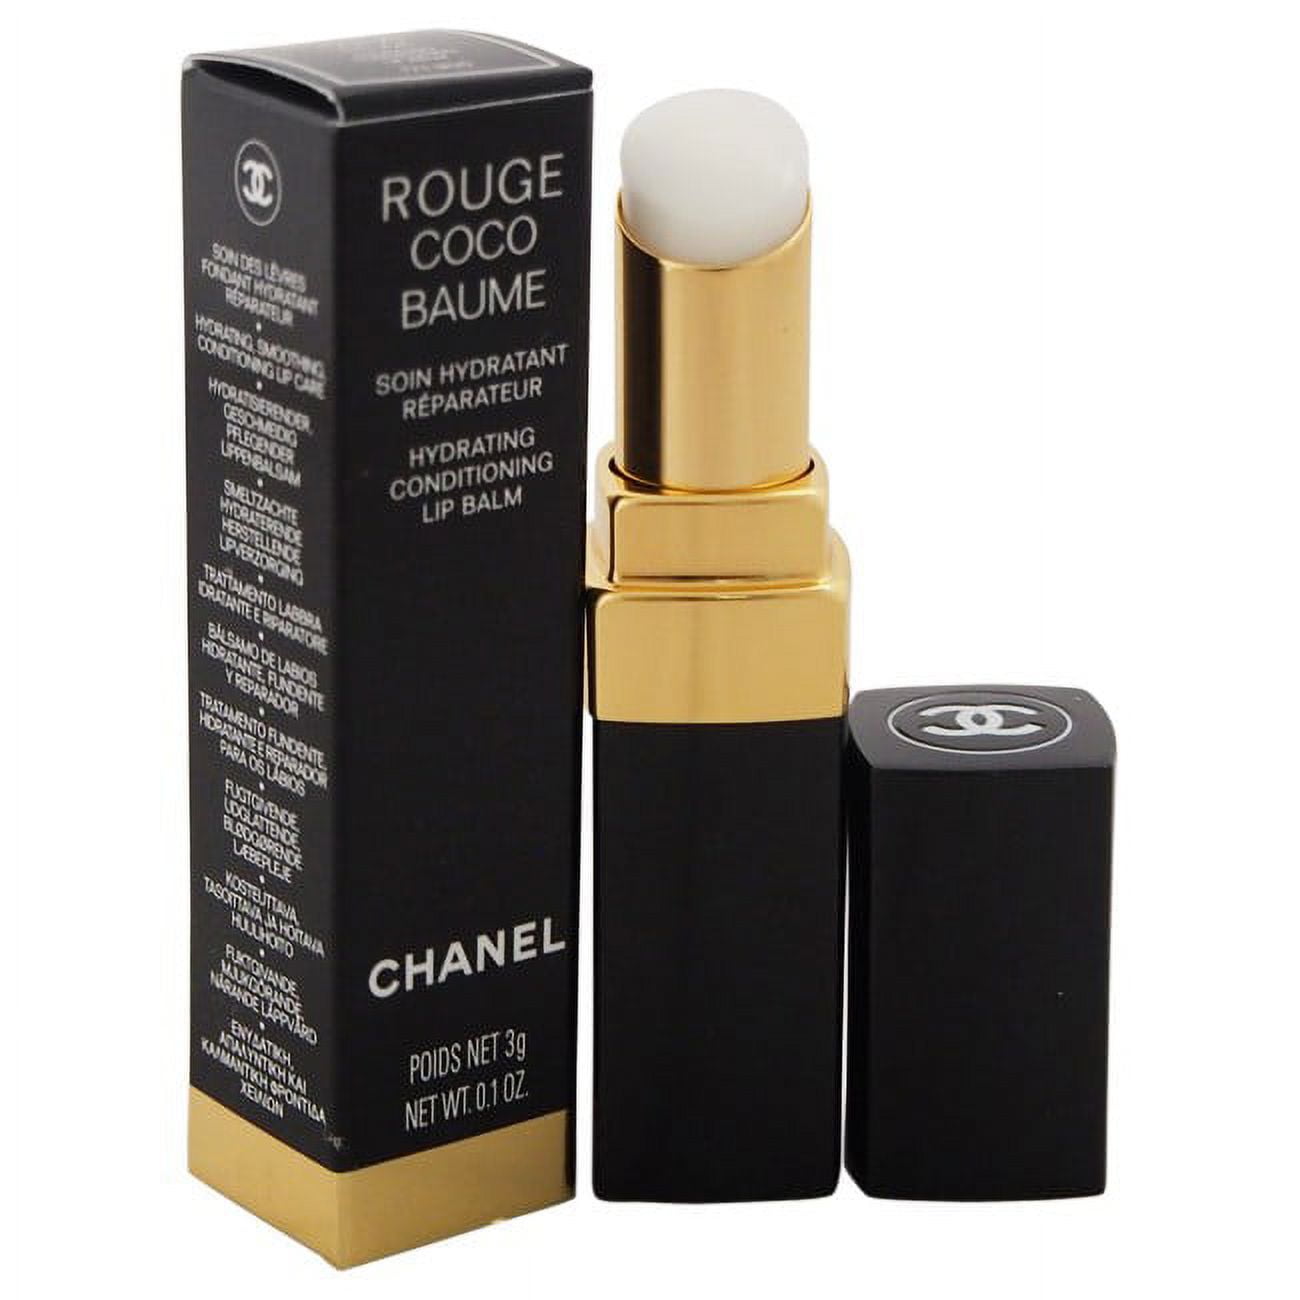 chanel rouge coco my rose